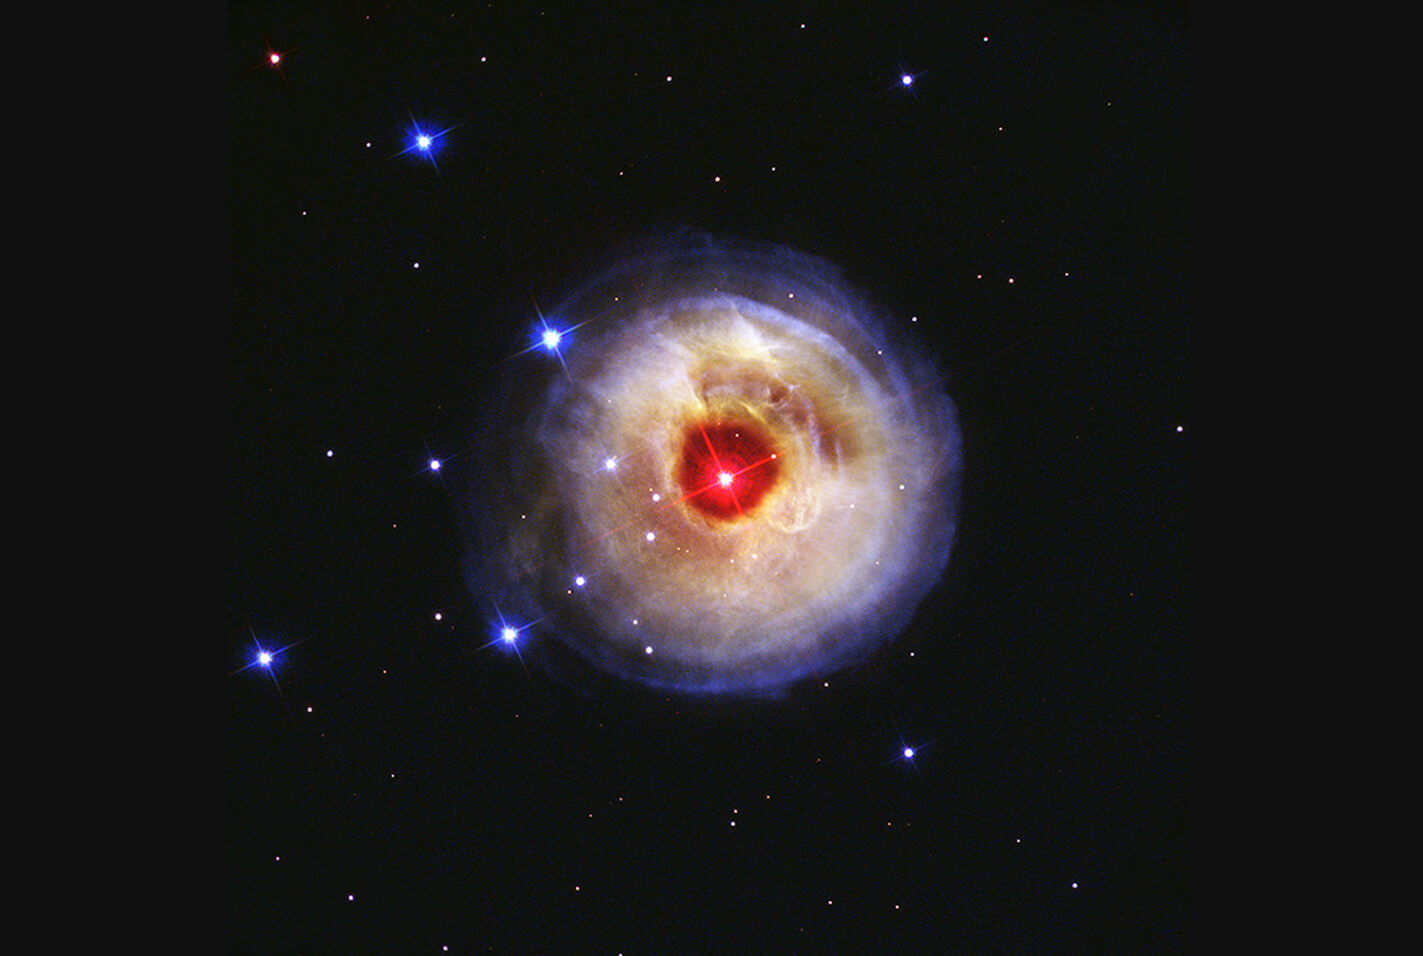 A central star is surrounded by circular layers of dust